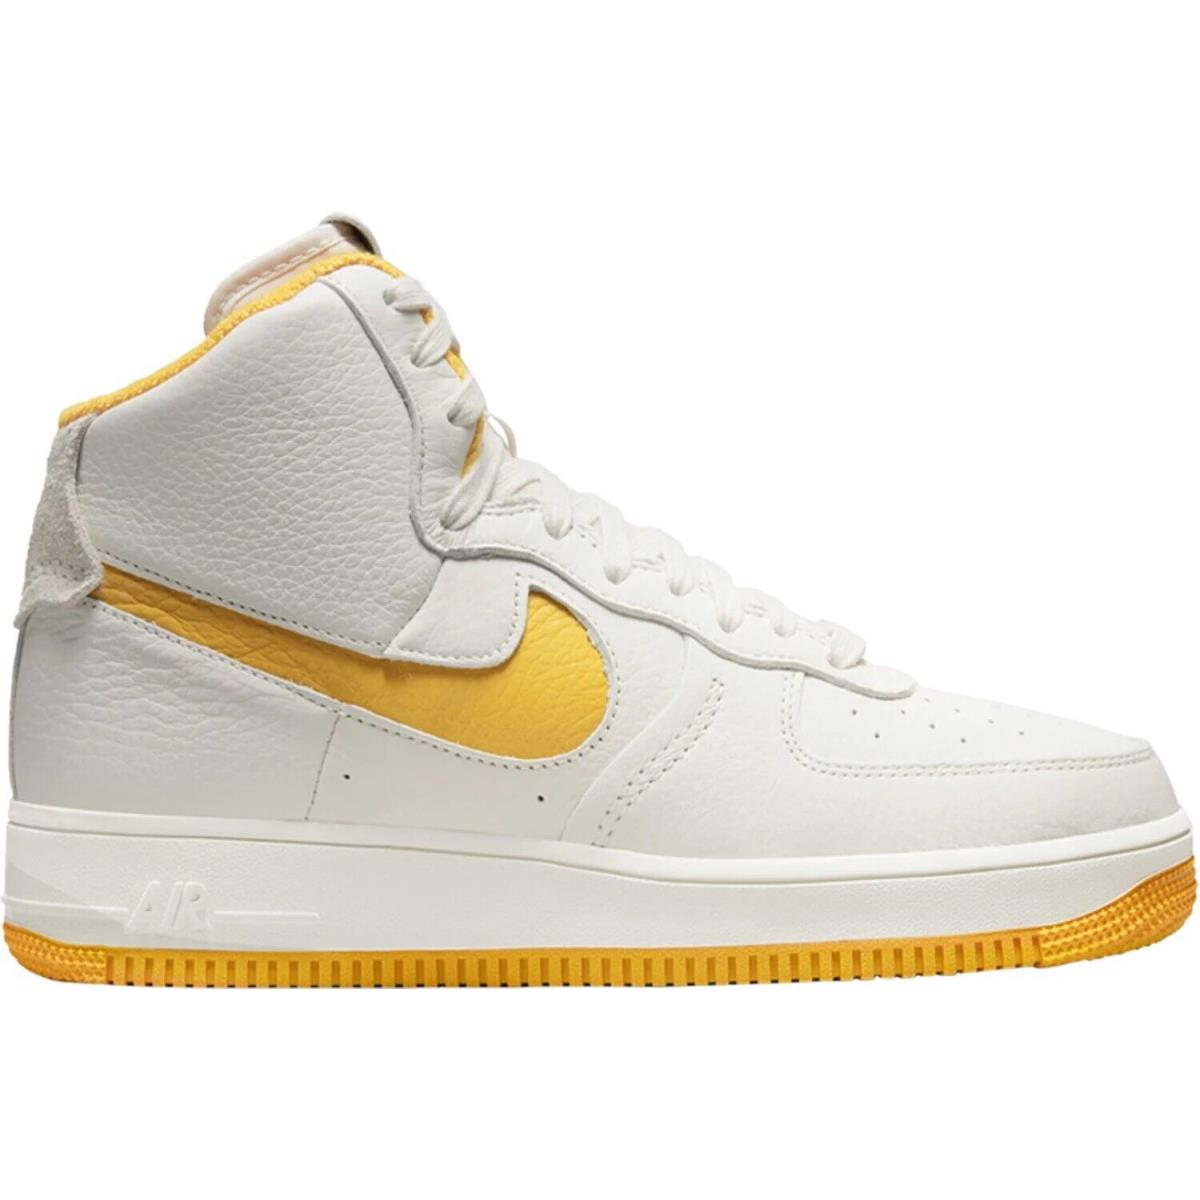 Nike W AF1 Air Force 1 Sculpt High White Yellow Shoes DC3590-001 Women`s 8-8.5 - White